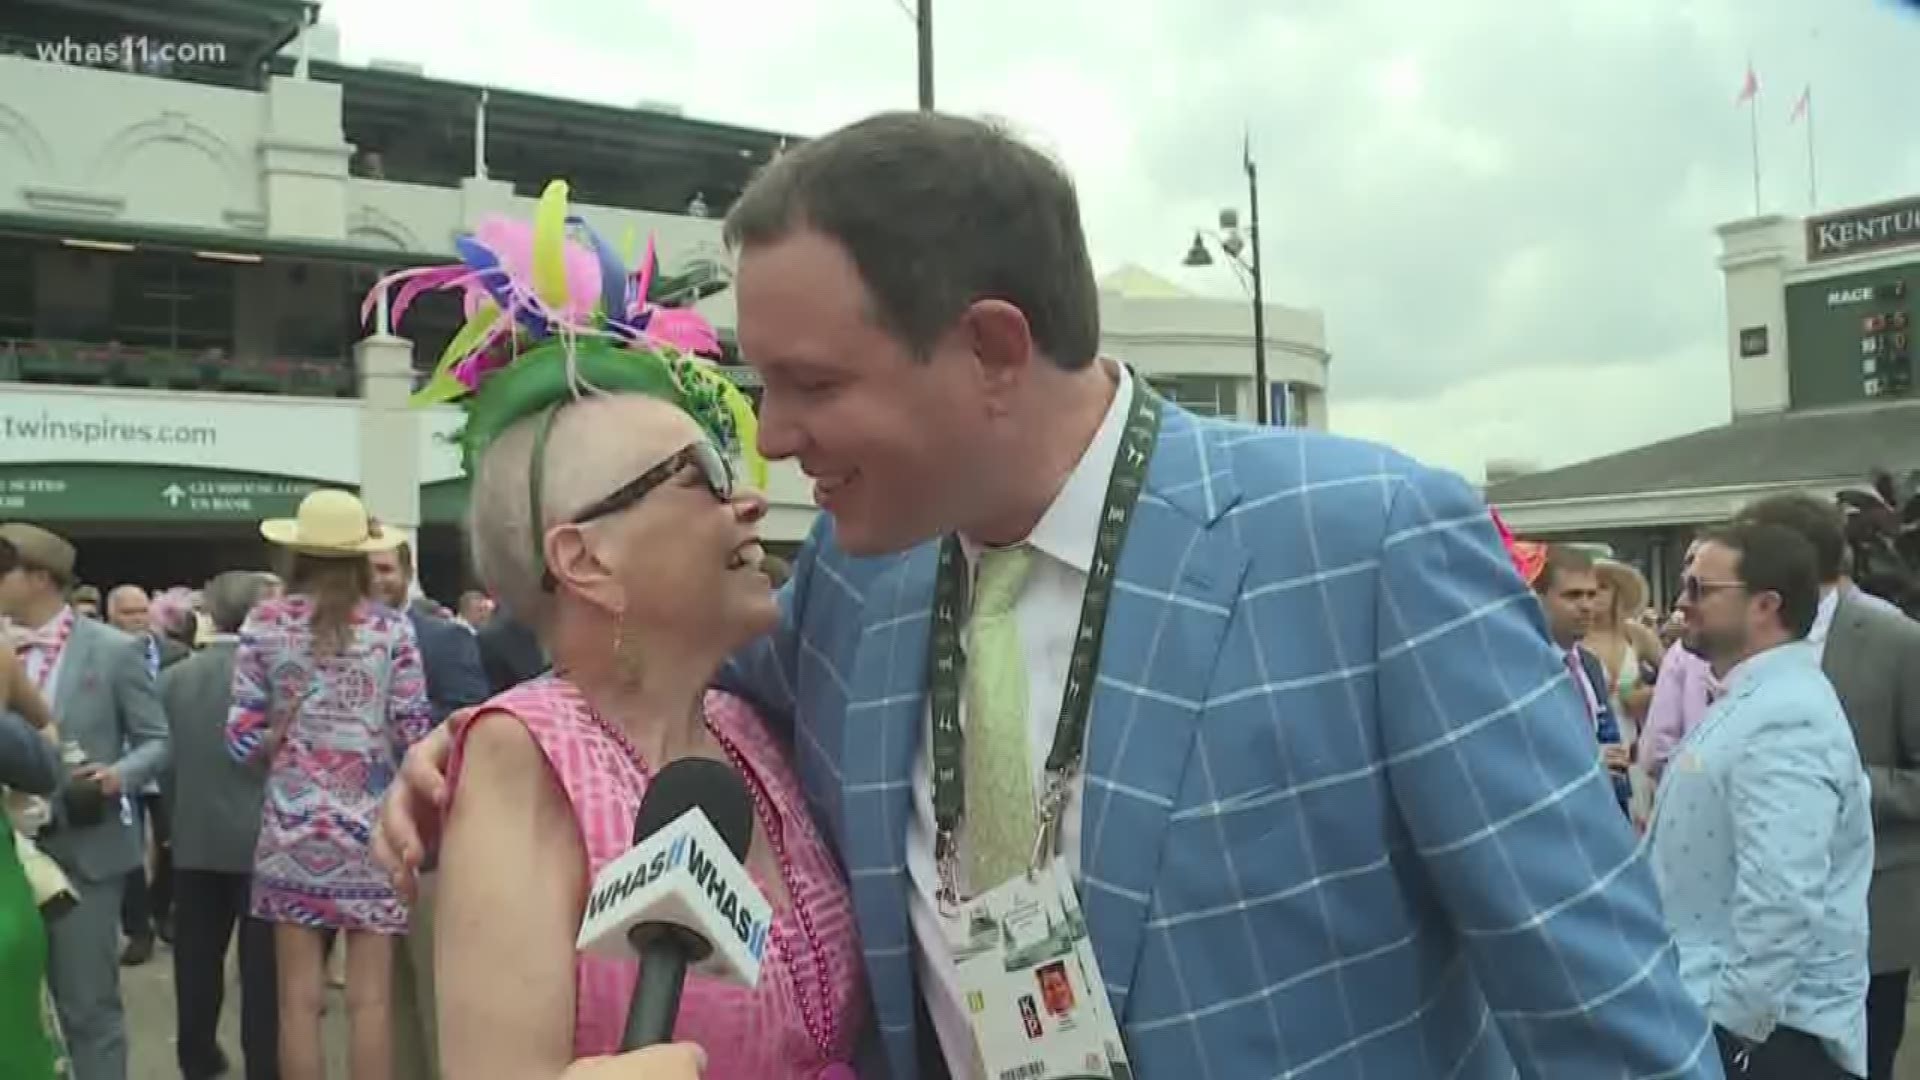 Cyndi checked two big items off her bucket list in one day. She walked in the Kentucky Oaks Survivors' Parade and met Matt Jones of Kentucky Sports Radio.